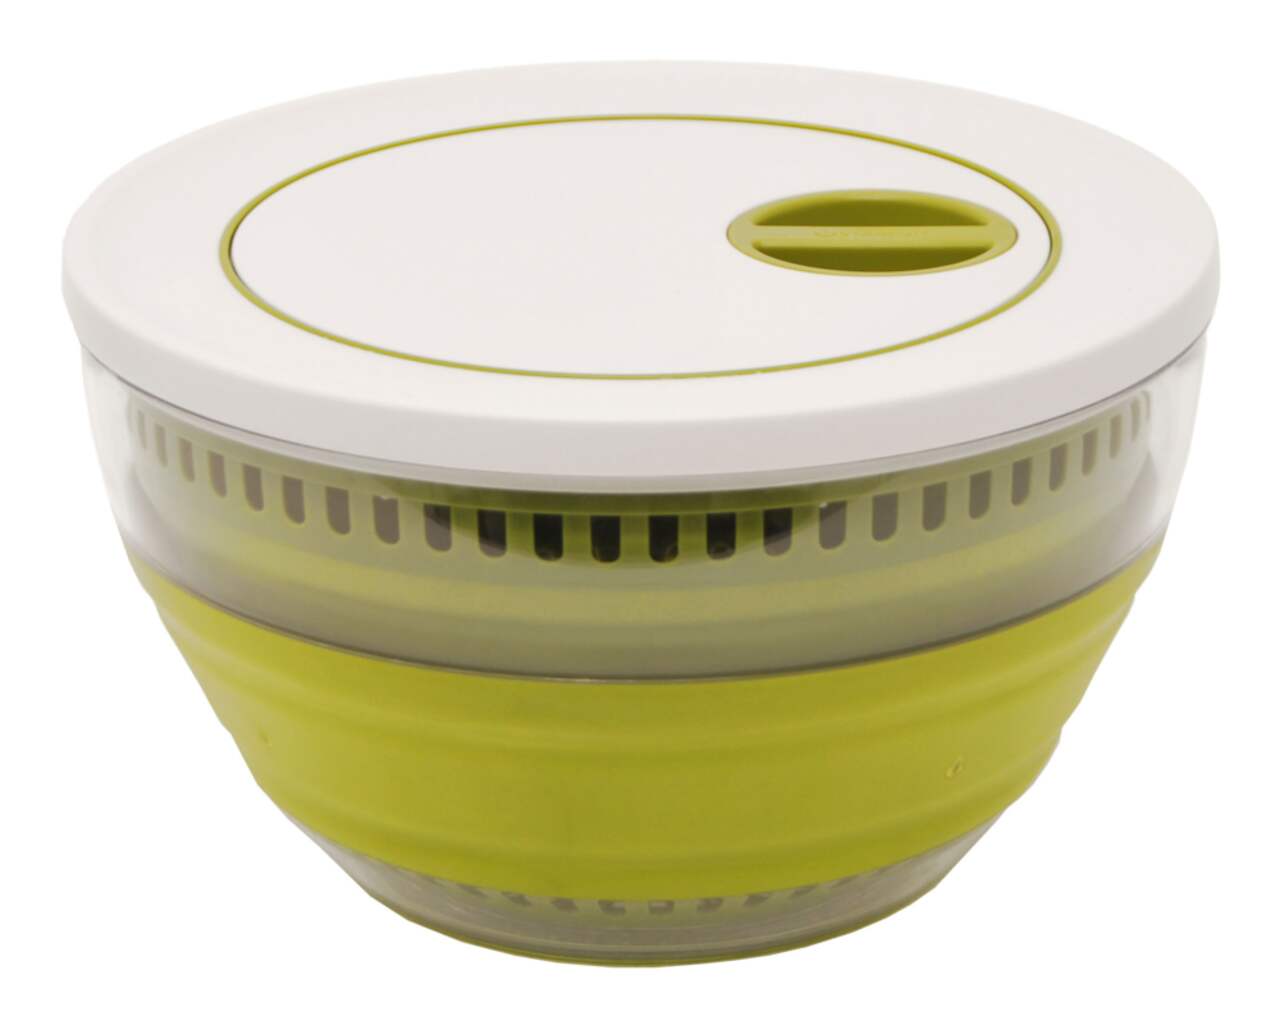 https://media-www.canadiantire.ca/product/living/kitchen/kitchen-tools-thermometers/0429986/starfrit-collapsible-salad-spinner-55dddd02-161d-4bfc-8268-9d4b135e60c6.png?imdensity=1&imwidth=640&impolicy=mZoom